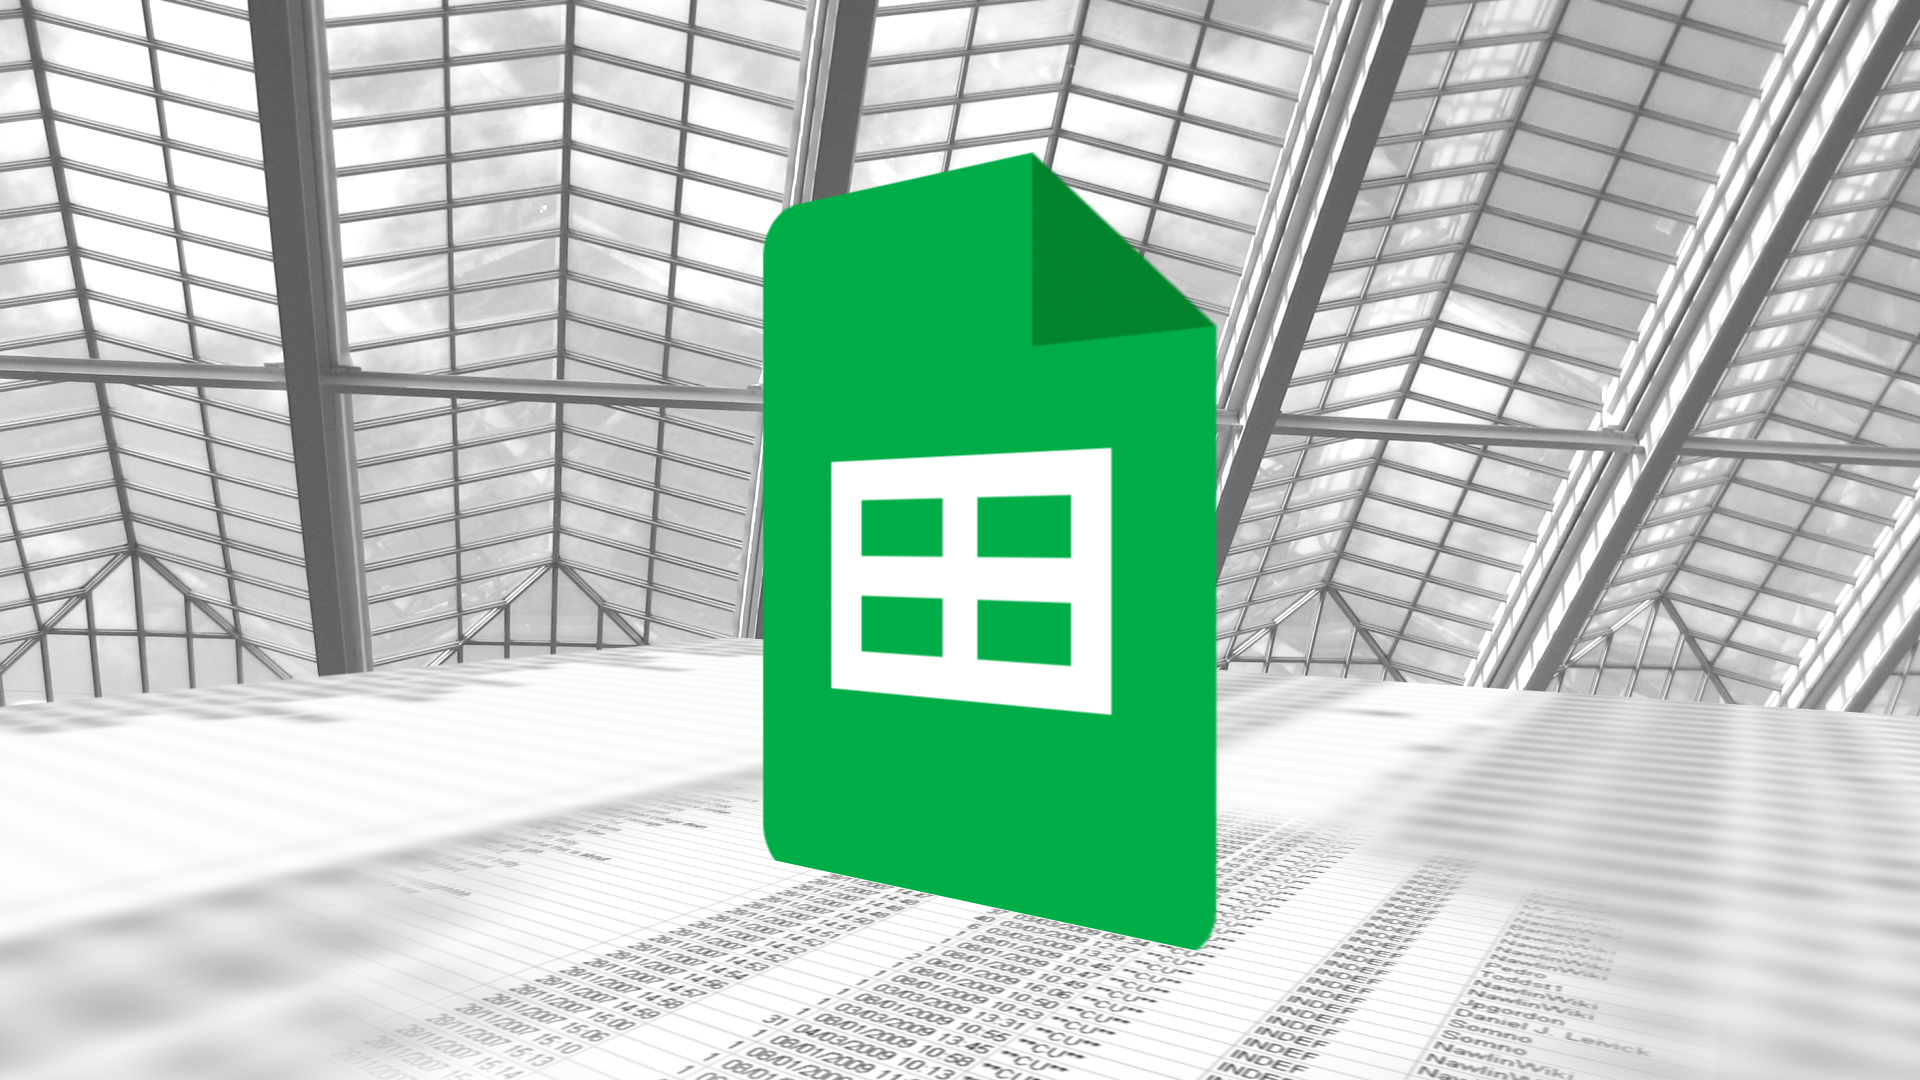 The Google Sheets logo against a spreadsheet and a glass ceiling